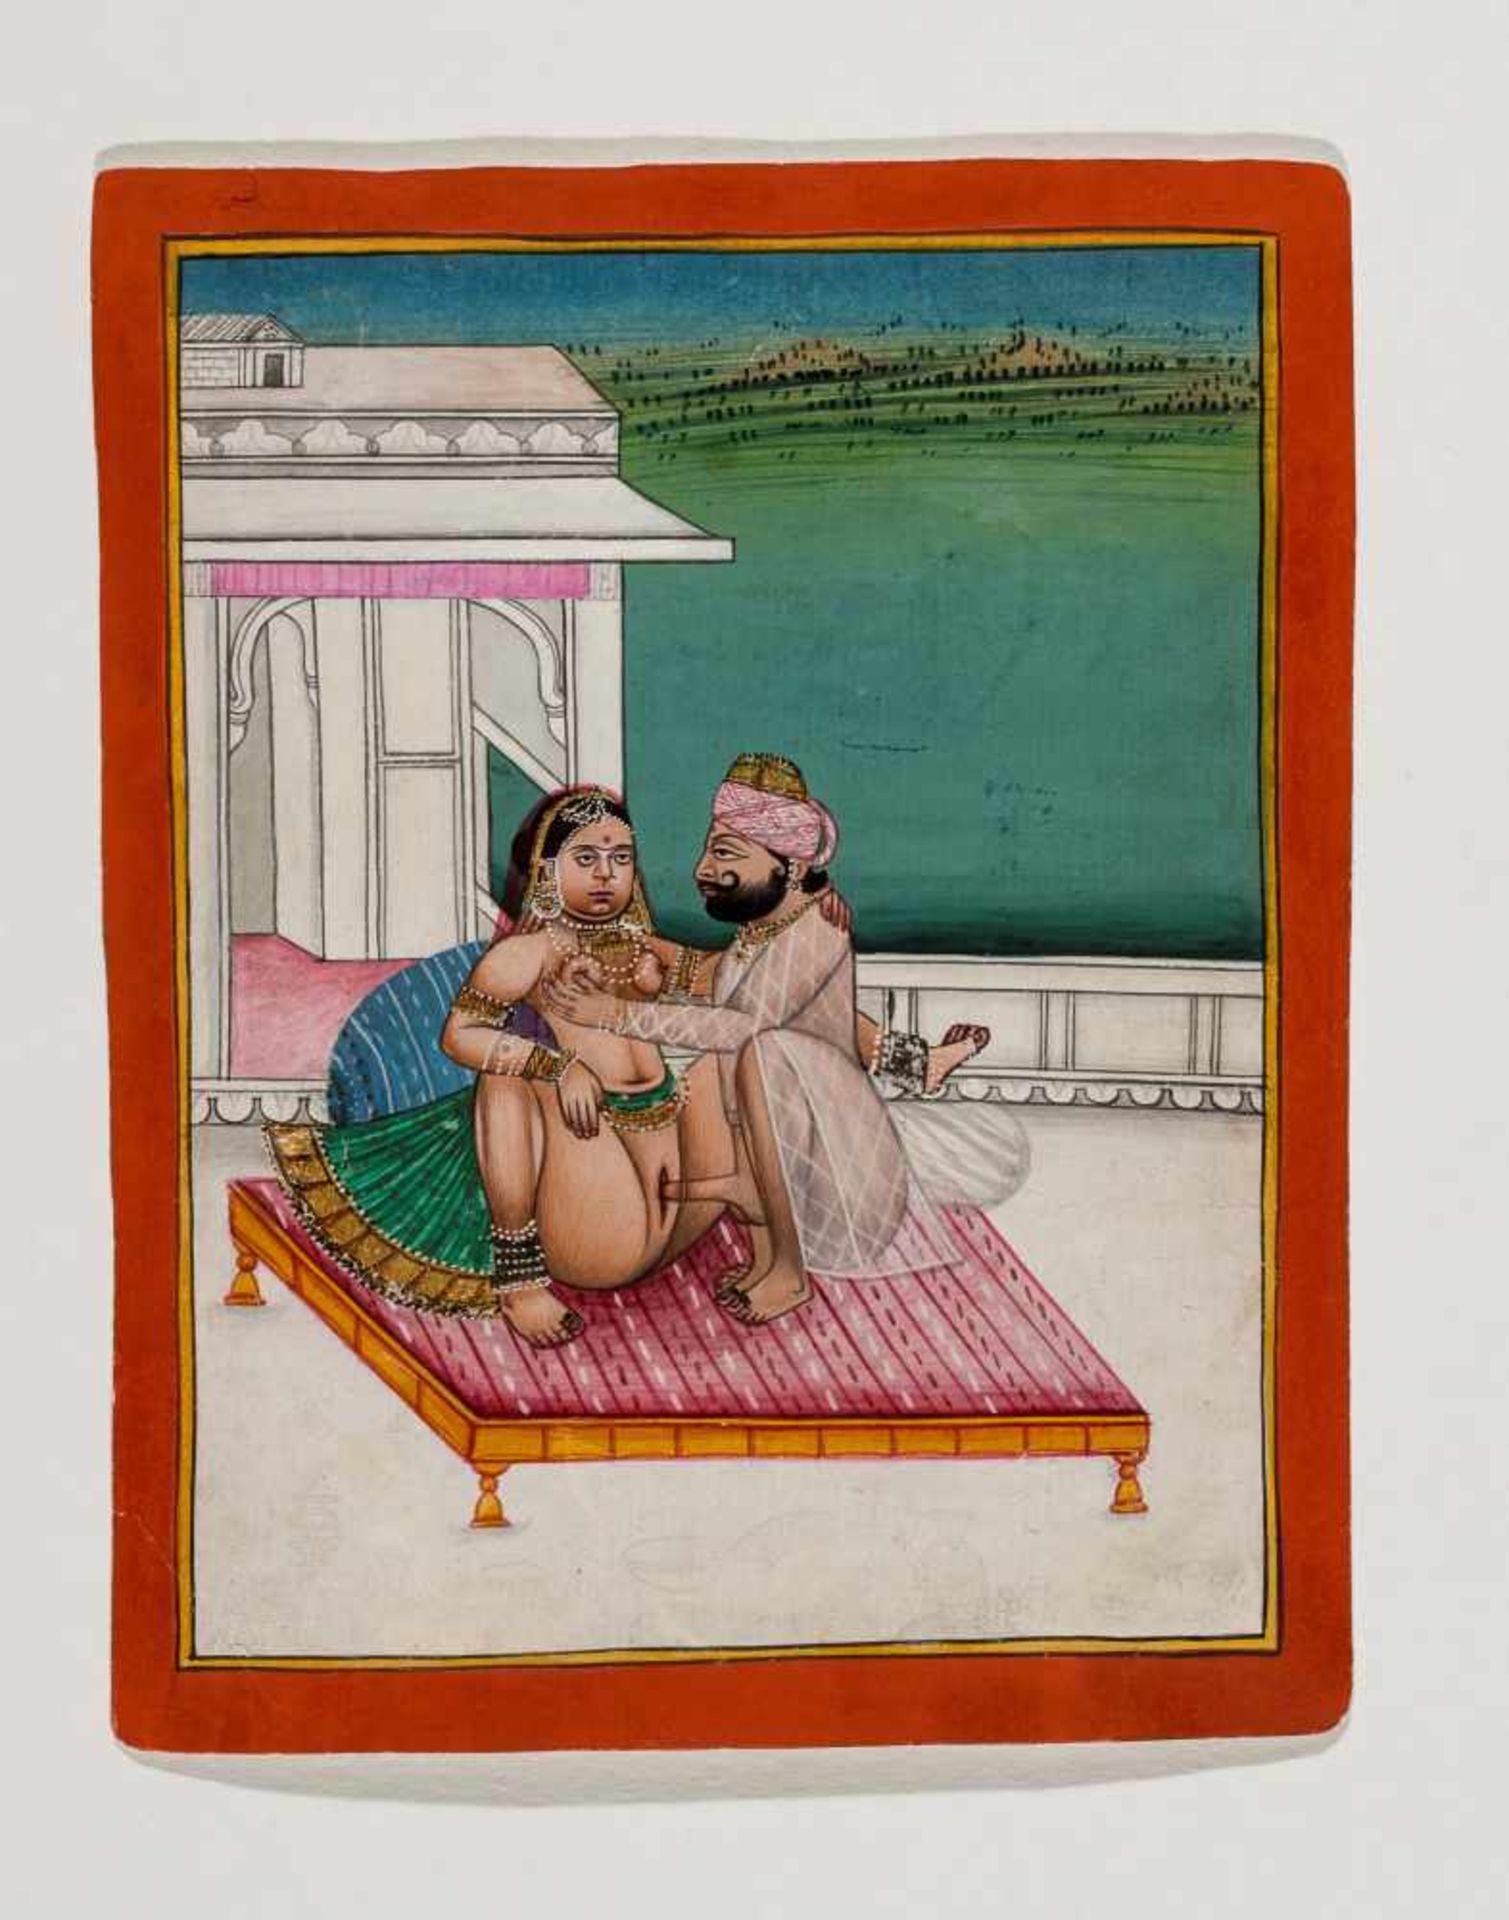 AN EROTIC MINIATURE PAINTING - INDIA, 19TH – EARLY 20th CENTURYGouache and gold paint on paper